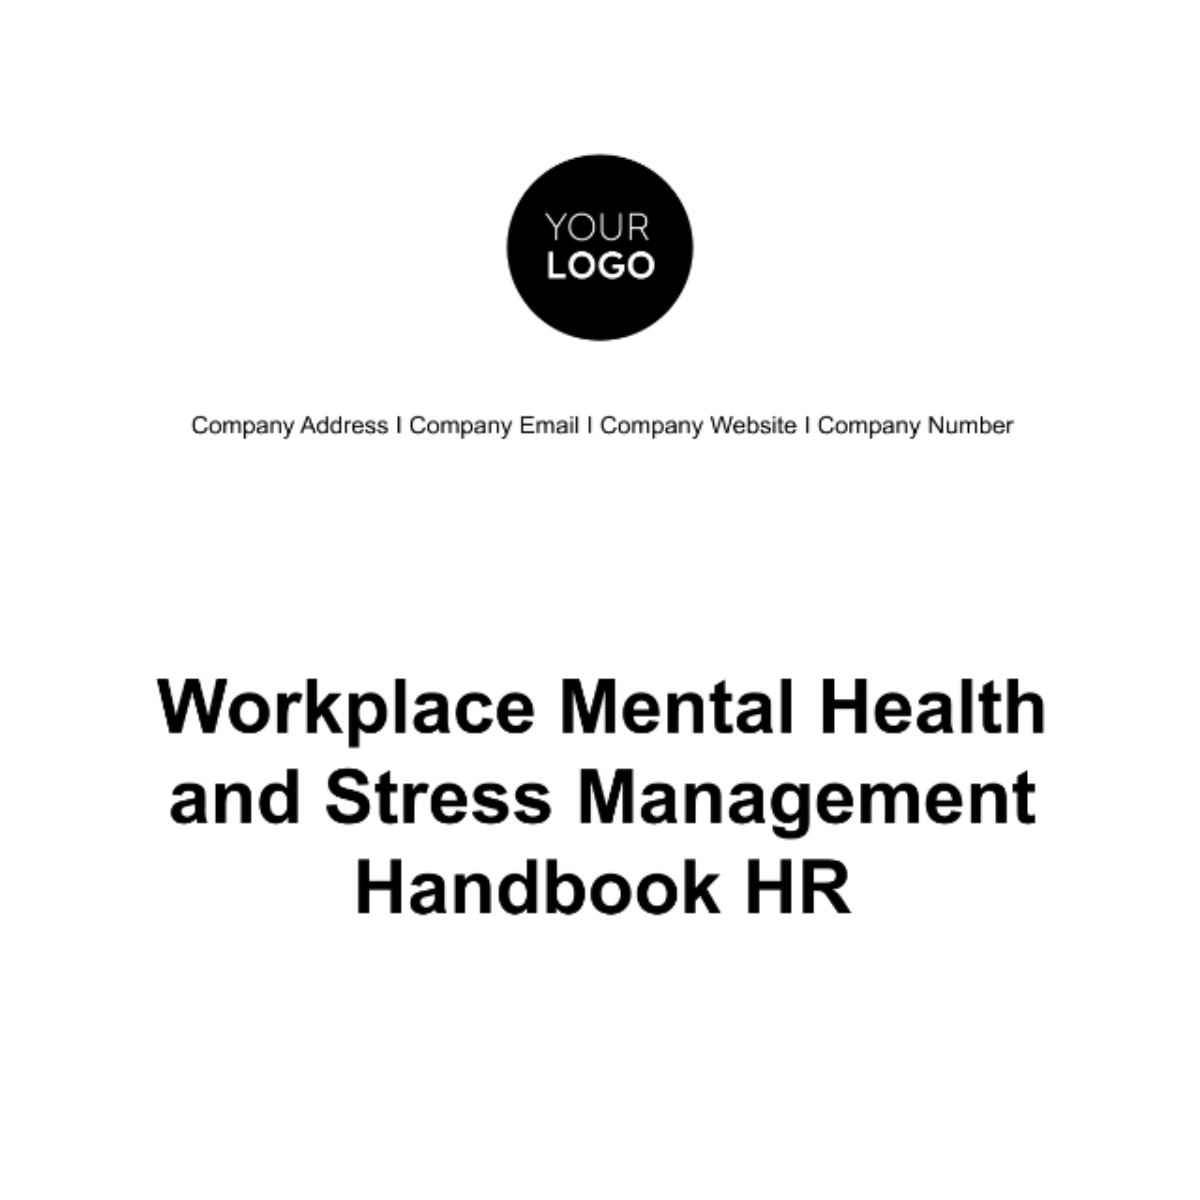 Free Workplace Mental Health and Stress Management Handbook HR Template